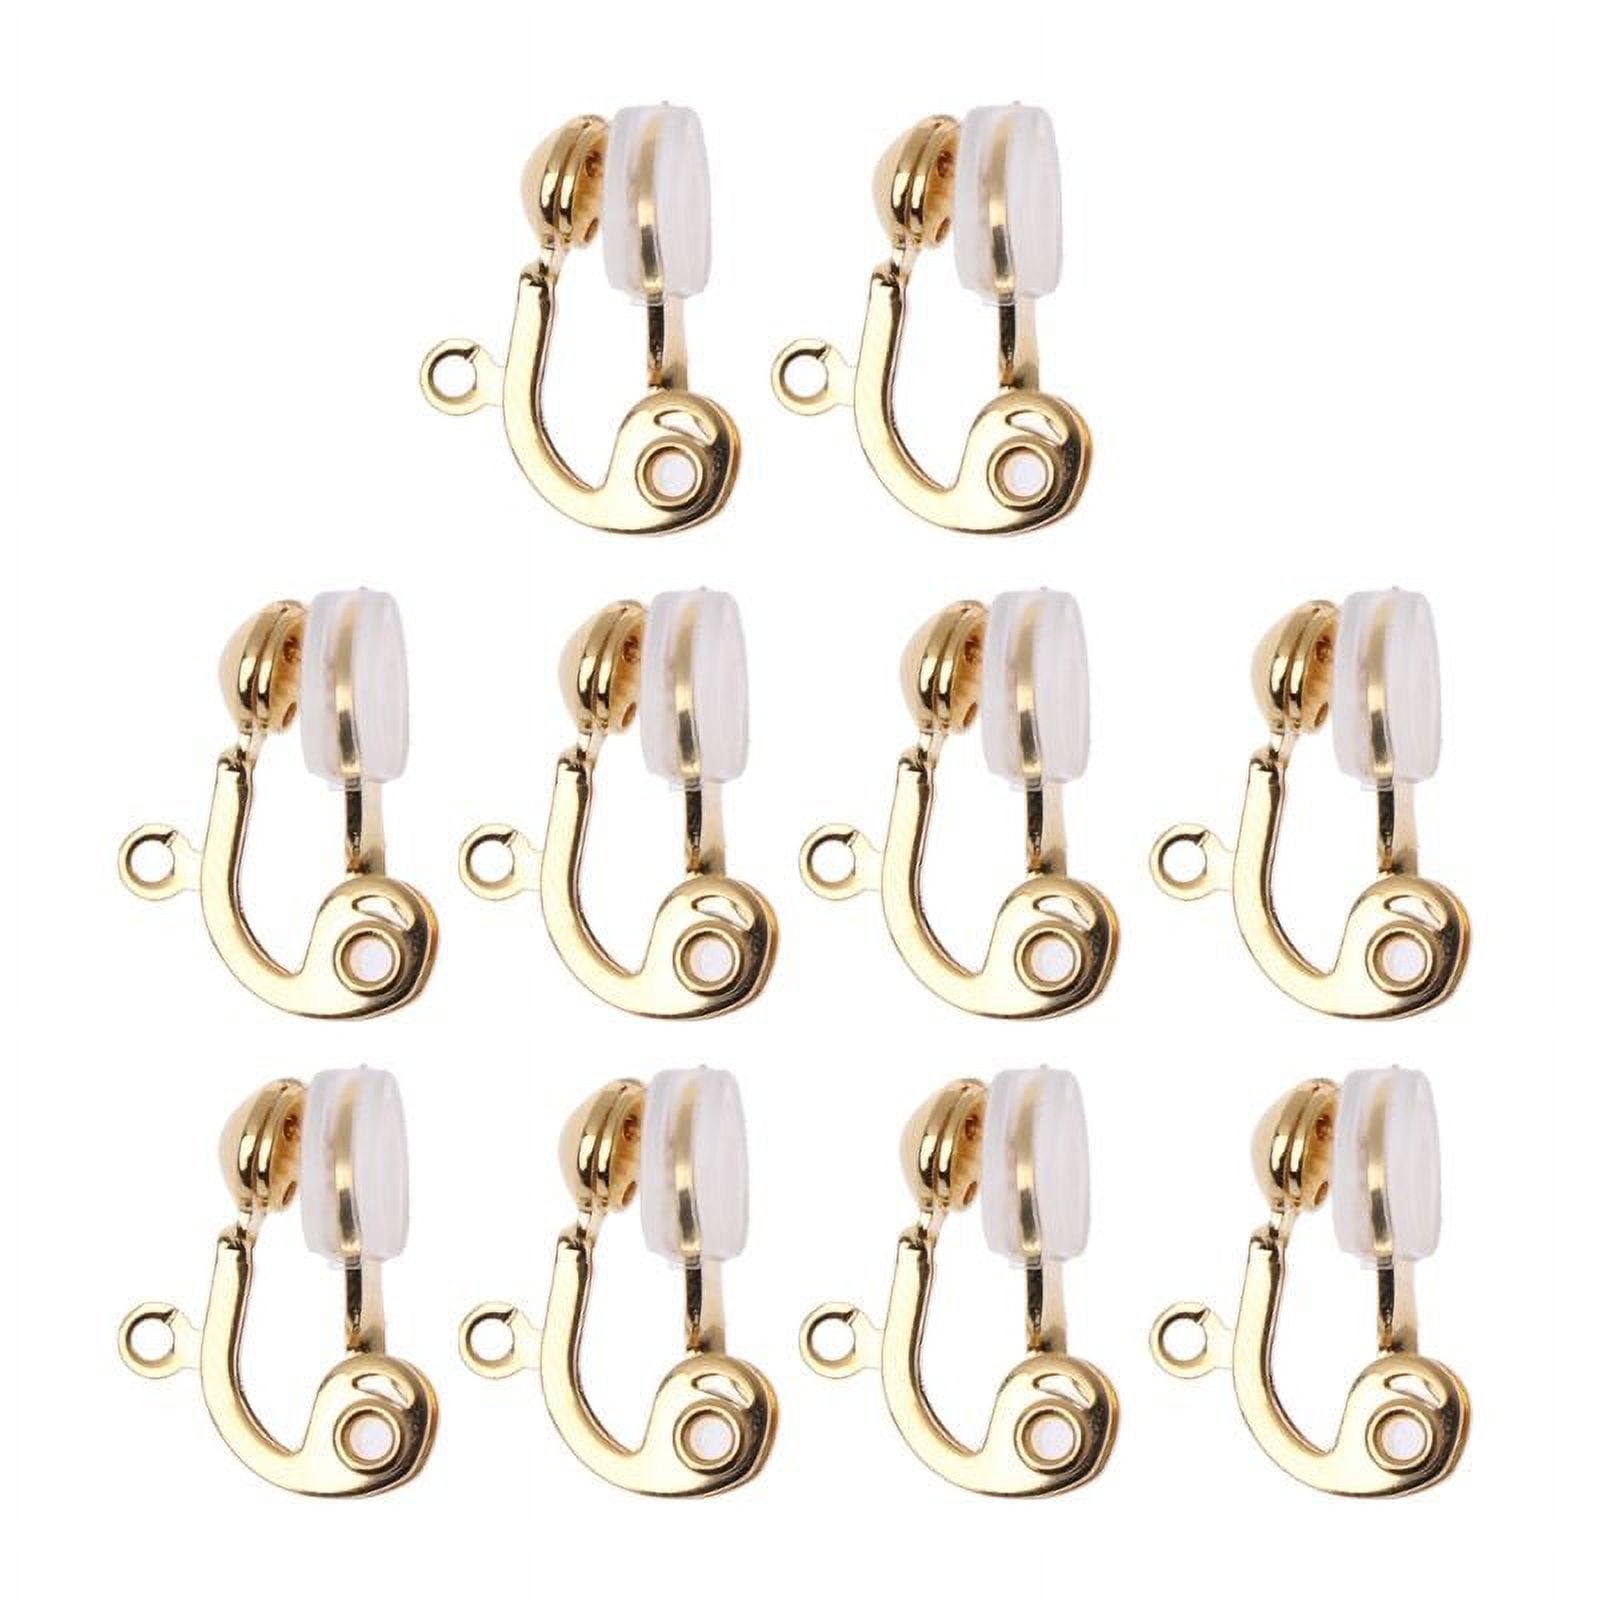 10 Pairs Earring Converters Pierced to Clip Pierced Earring Converters to Clip on Pierced to Clip Earring Converter Clips Rarrings for Women Girls